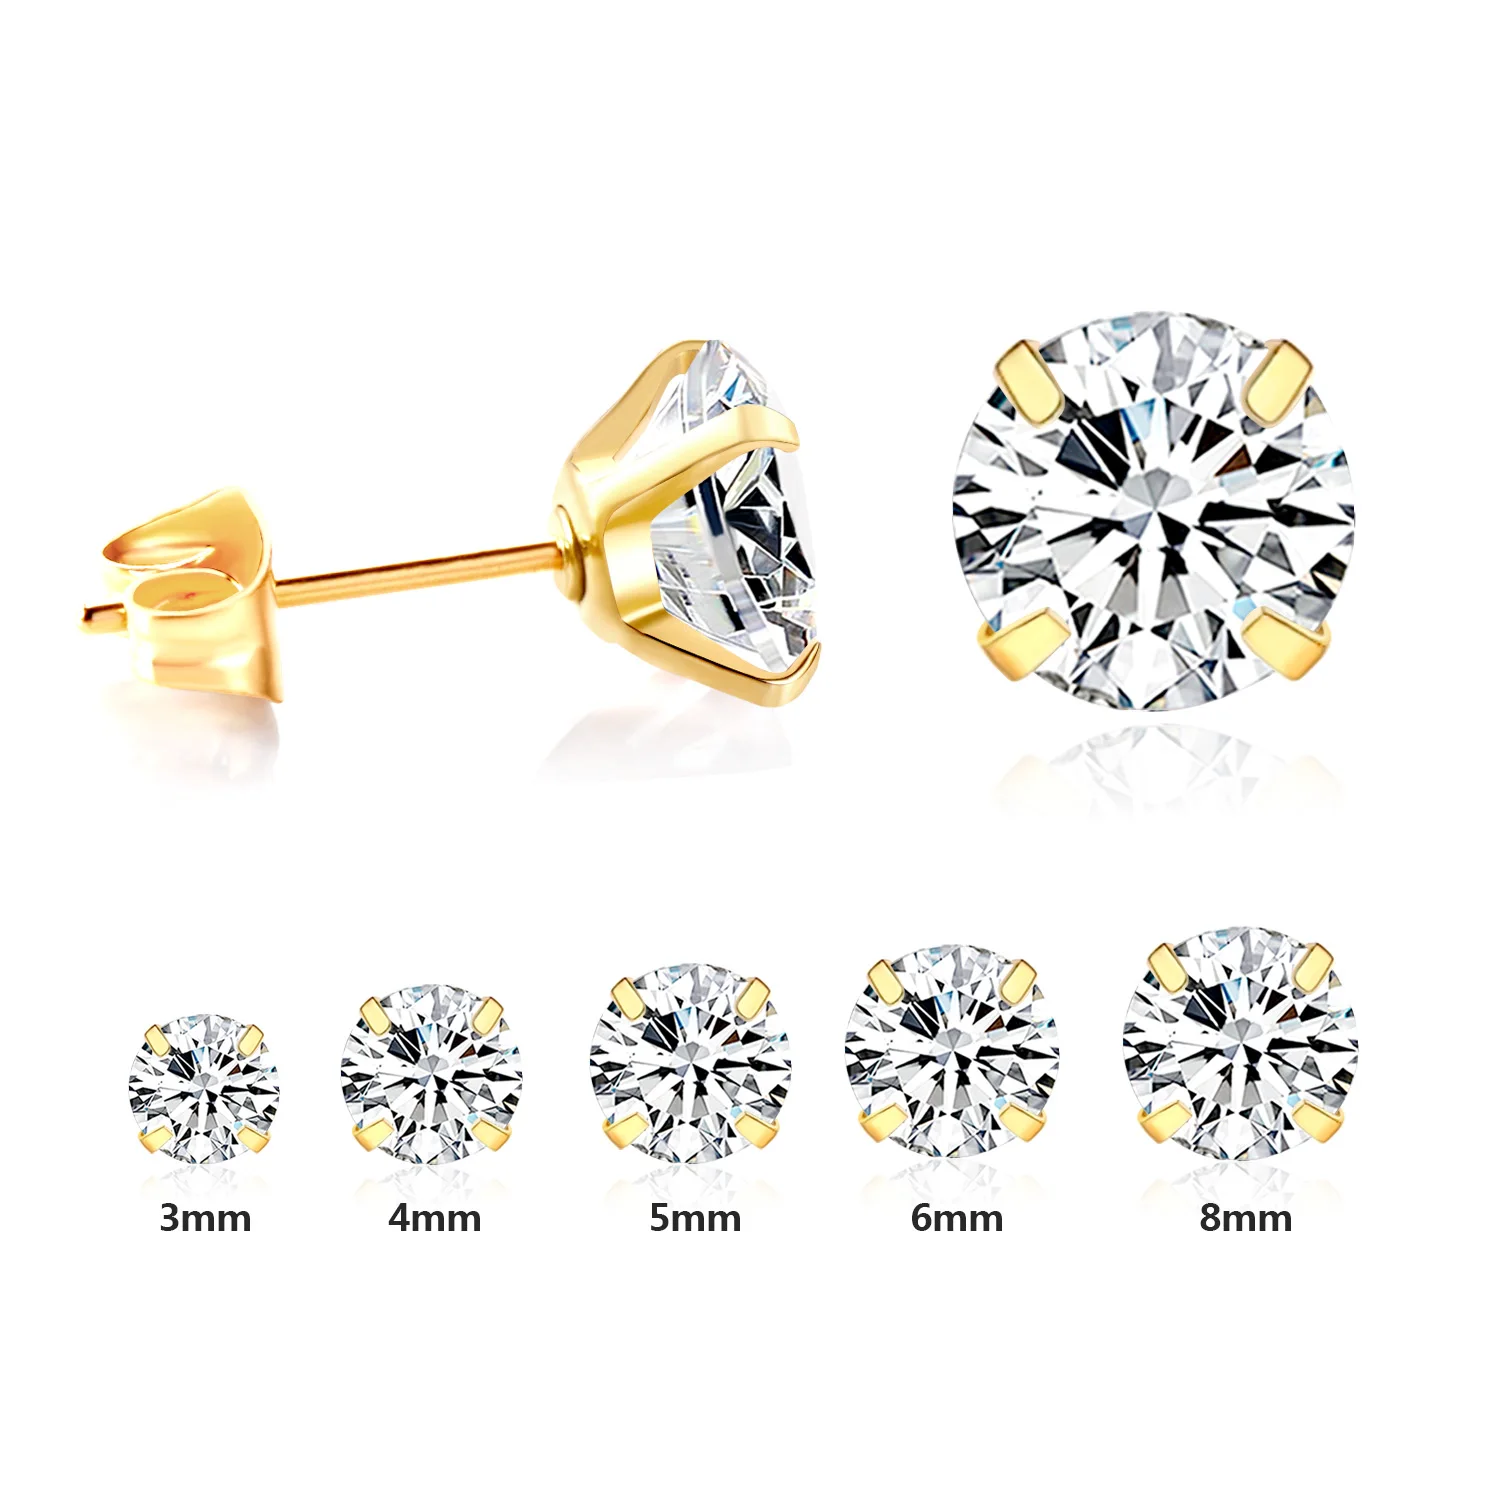 LUXUSTEEL 5Pairs/Set Mix Size CZ Earrings Women Men Gold Color Stainlesss Steel Square Crystal Zircon Screw Stud Earring 3-7mm images - 6